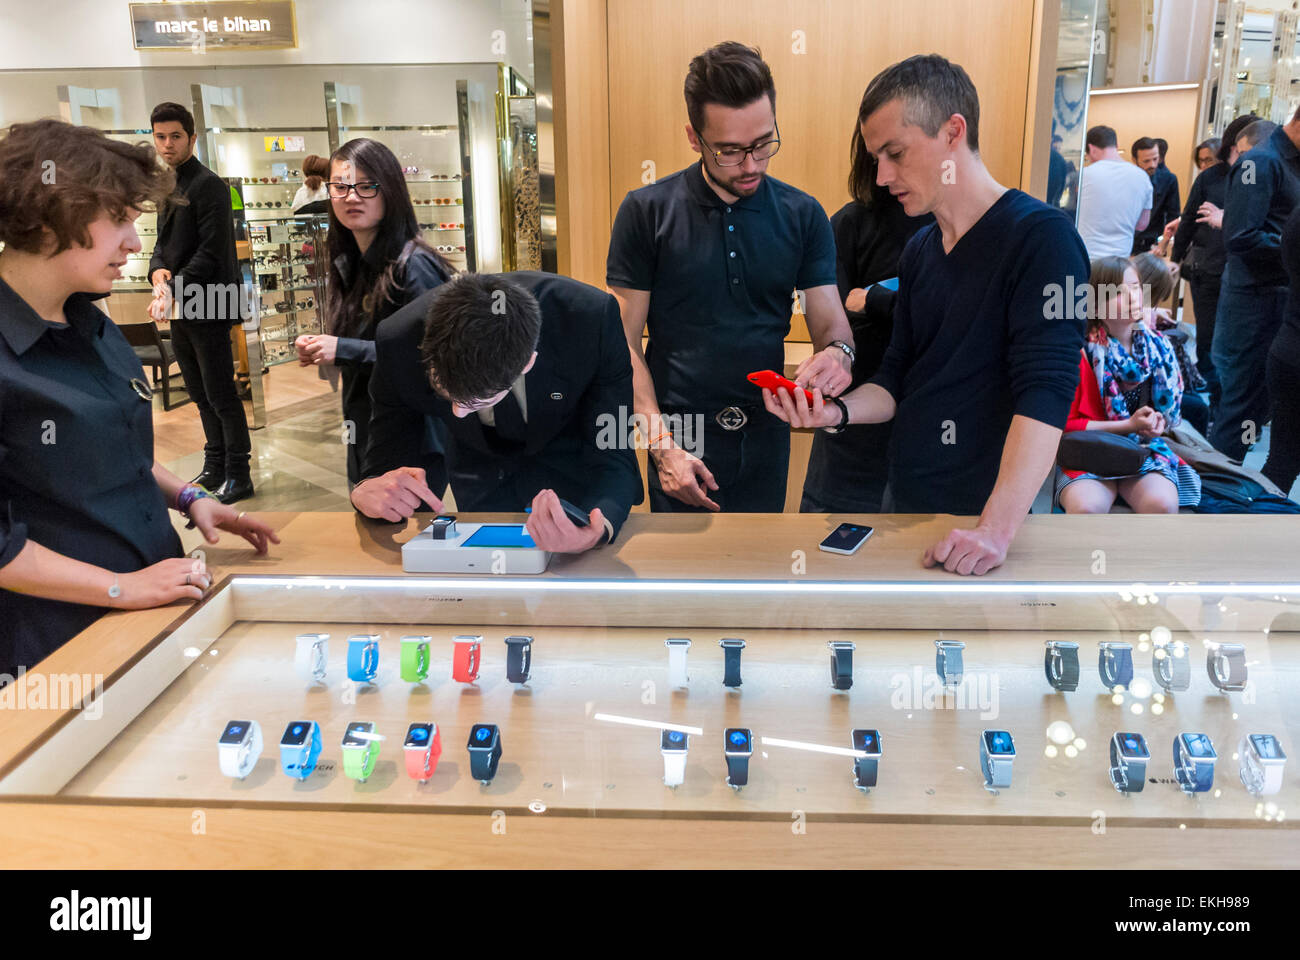 Paris, France. New Apple Corp. Store Opens in French Department Store, Galeries Lafayette for I-Watch Customers Looking at Products, apple customer, retail display Stock Photo